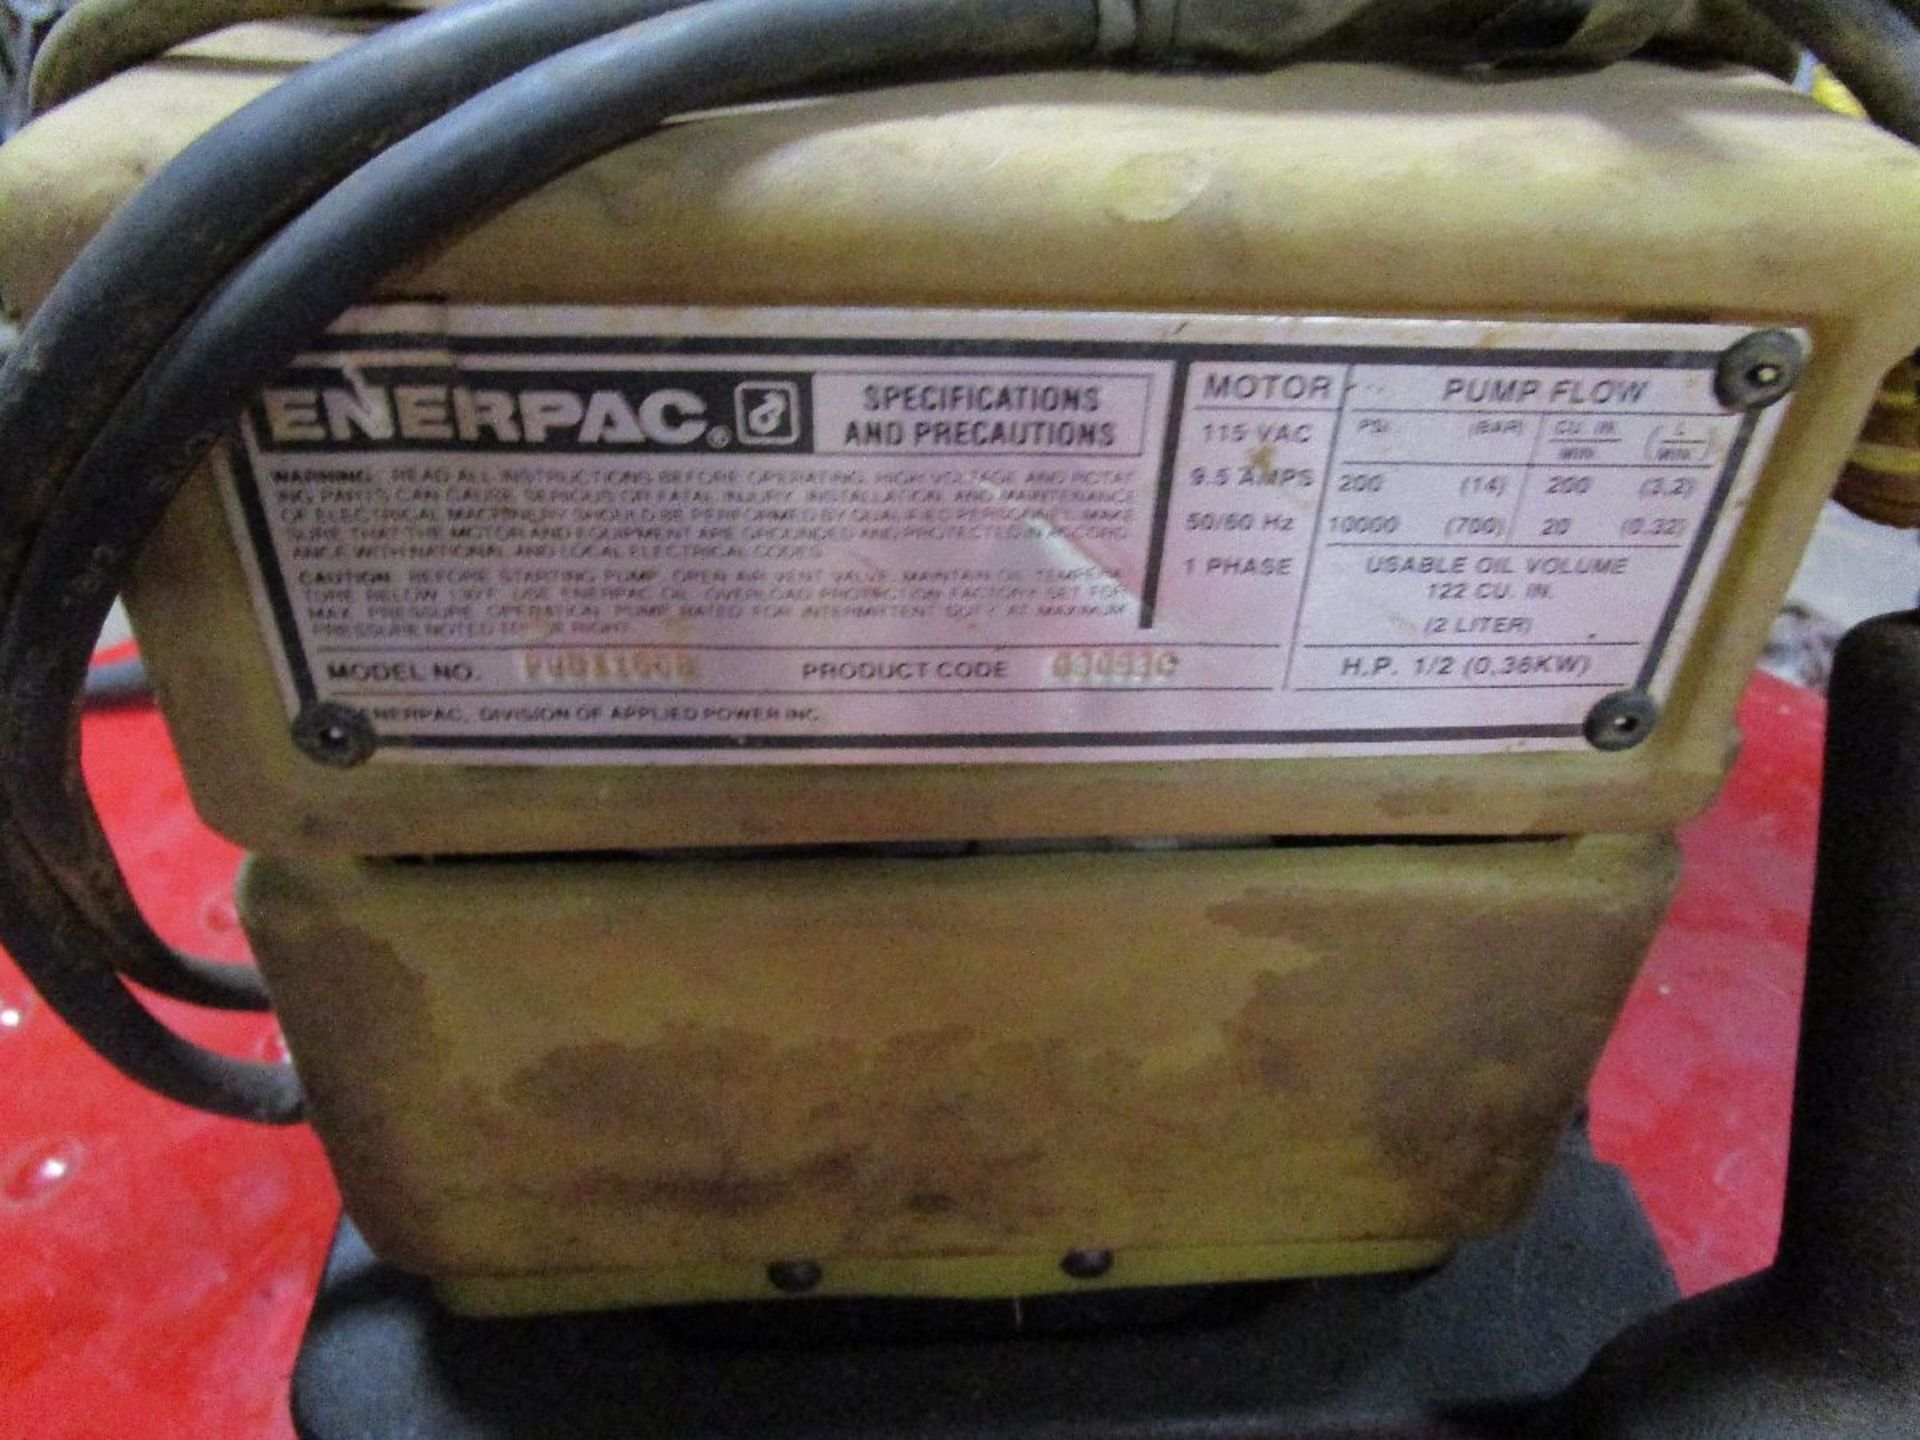 Enerpac Model PUD1100D Hydraulic Portable Electric Pump - Image 2 of 2